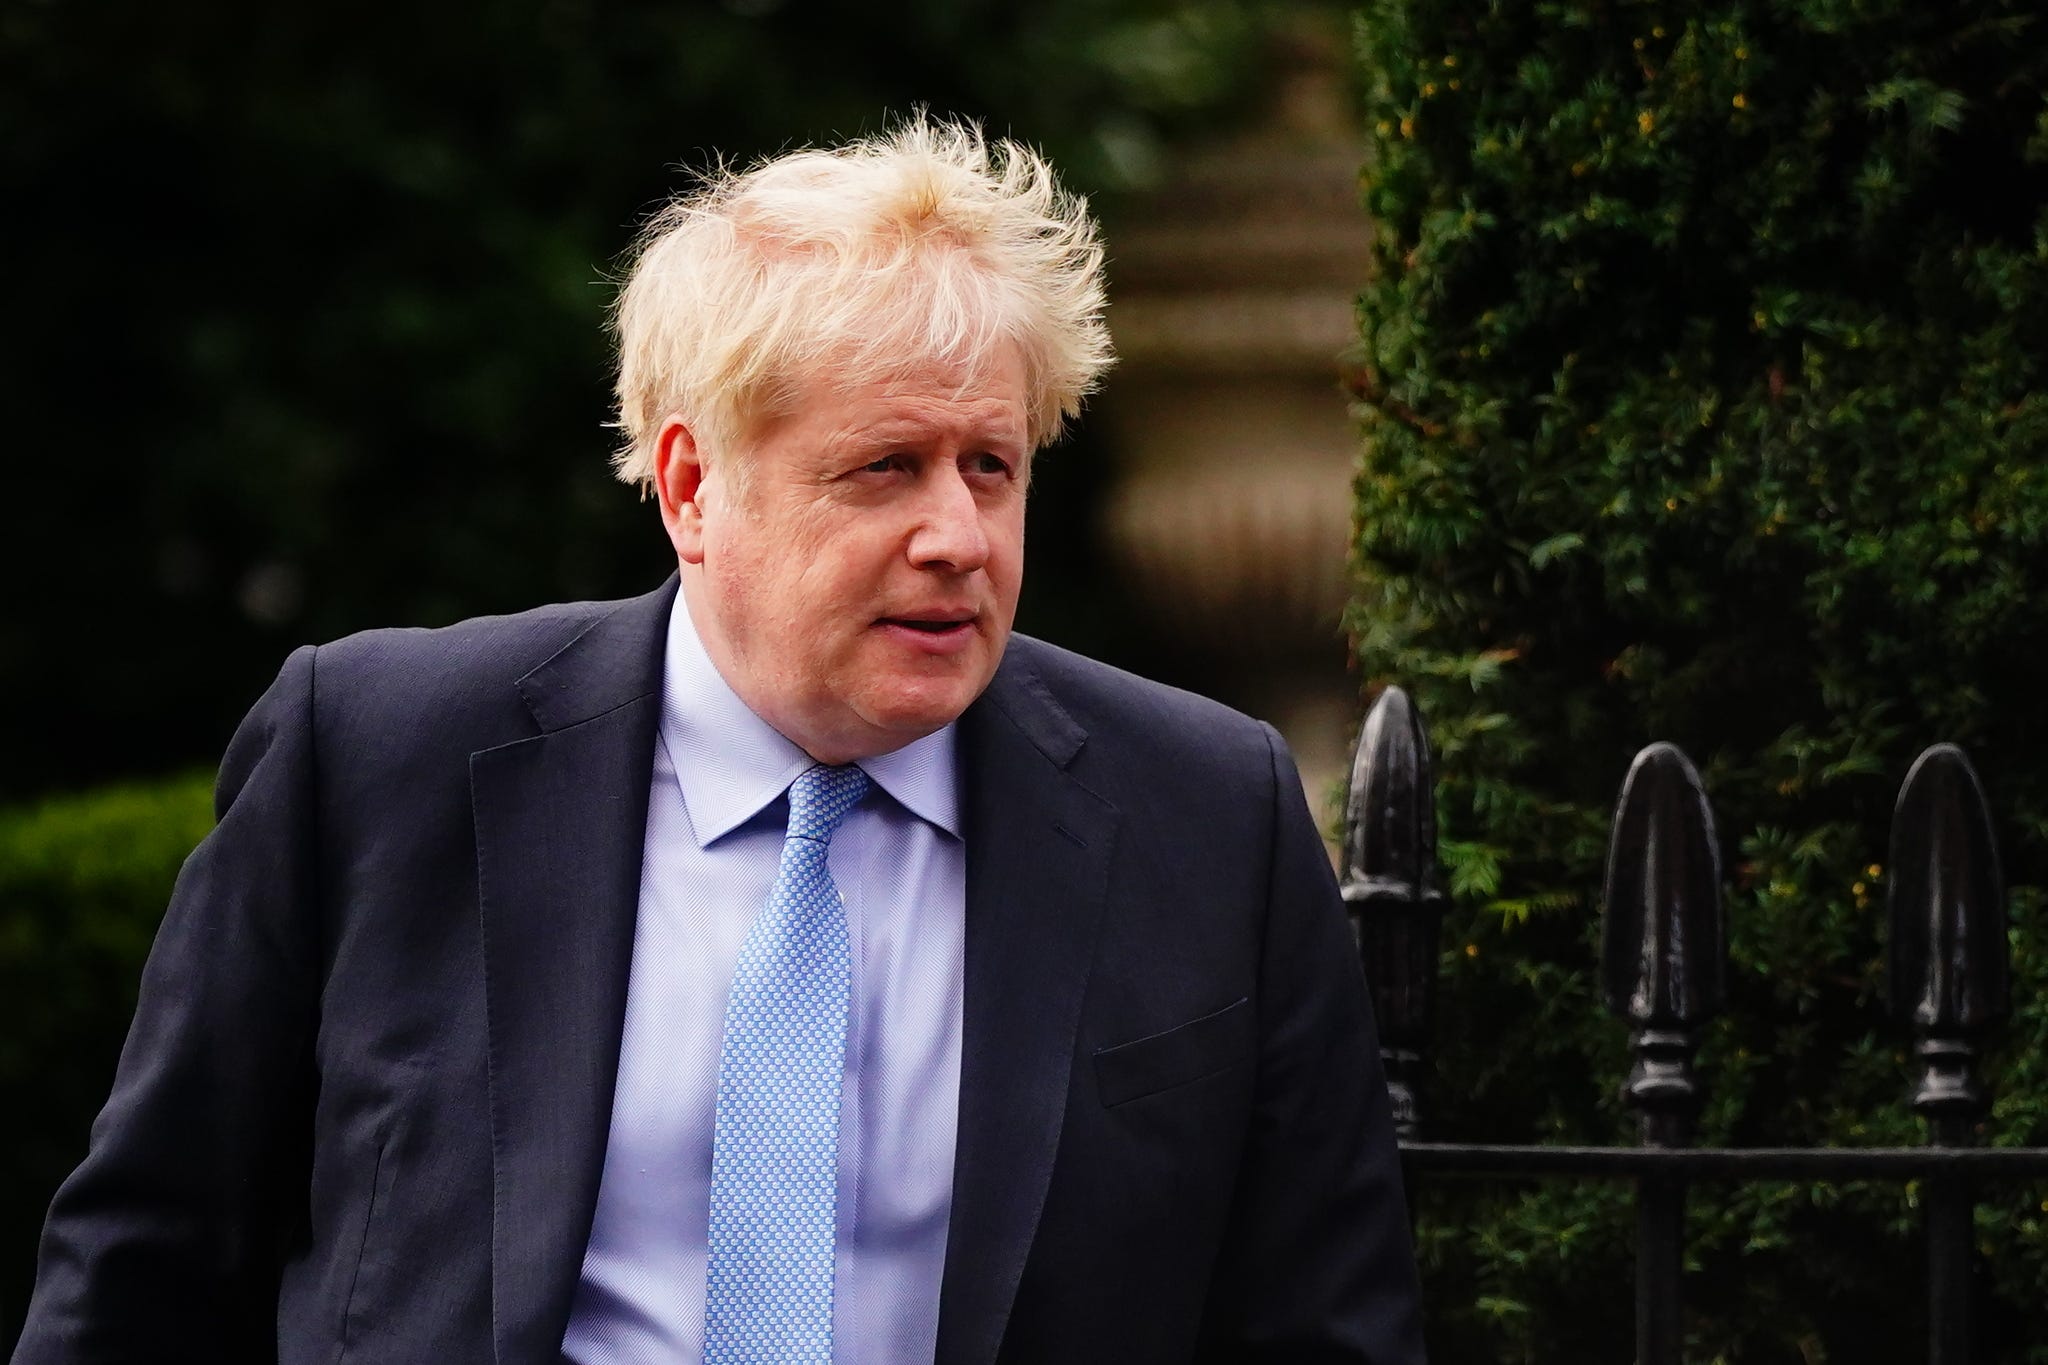 WhatsApp messages belonging to Boris Johnson have been requested